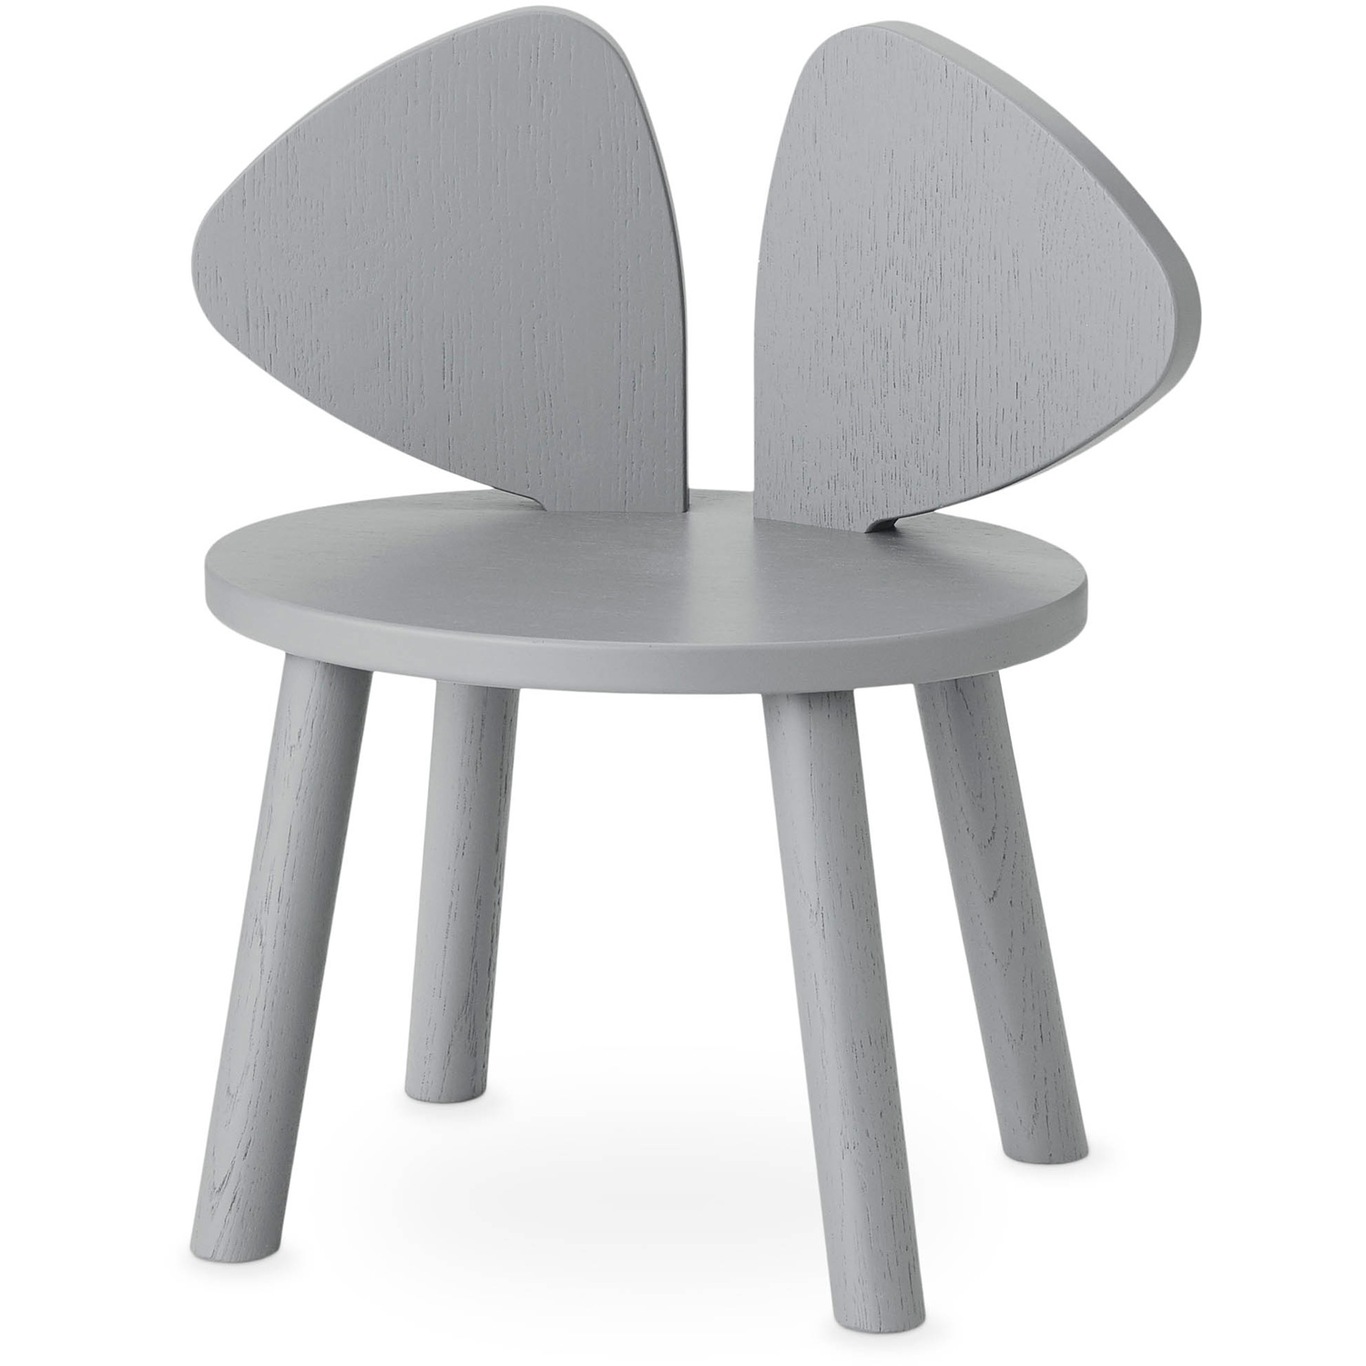 Mouse Children's chair (2-5 years), Grey